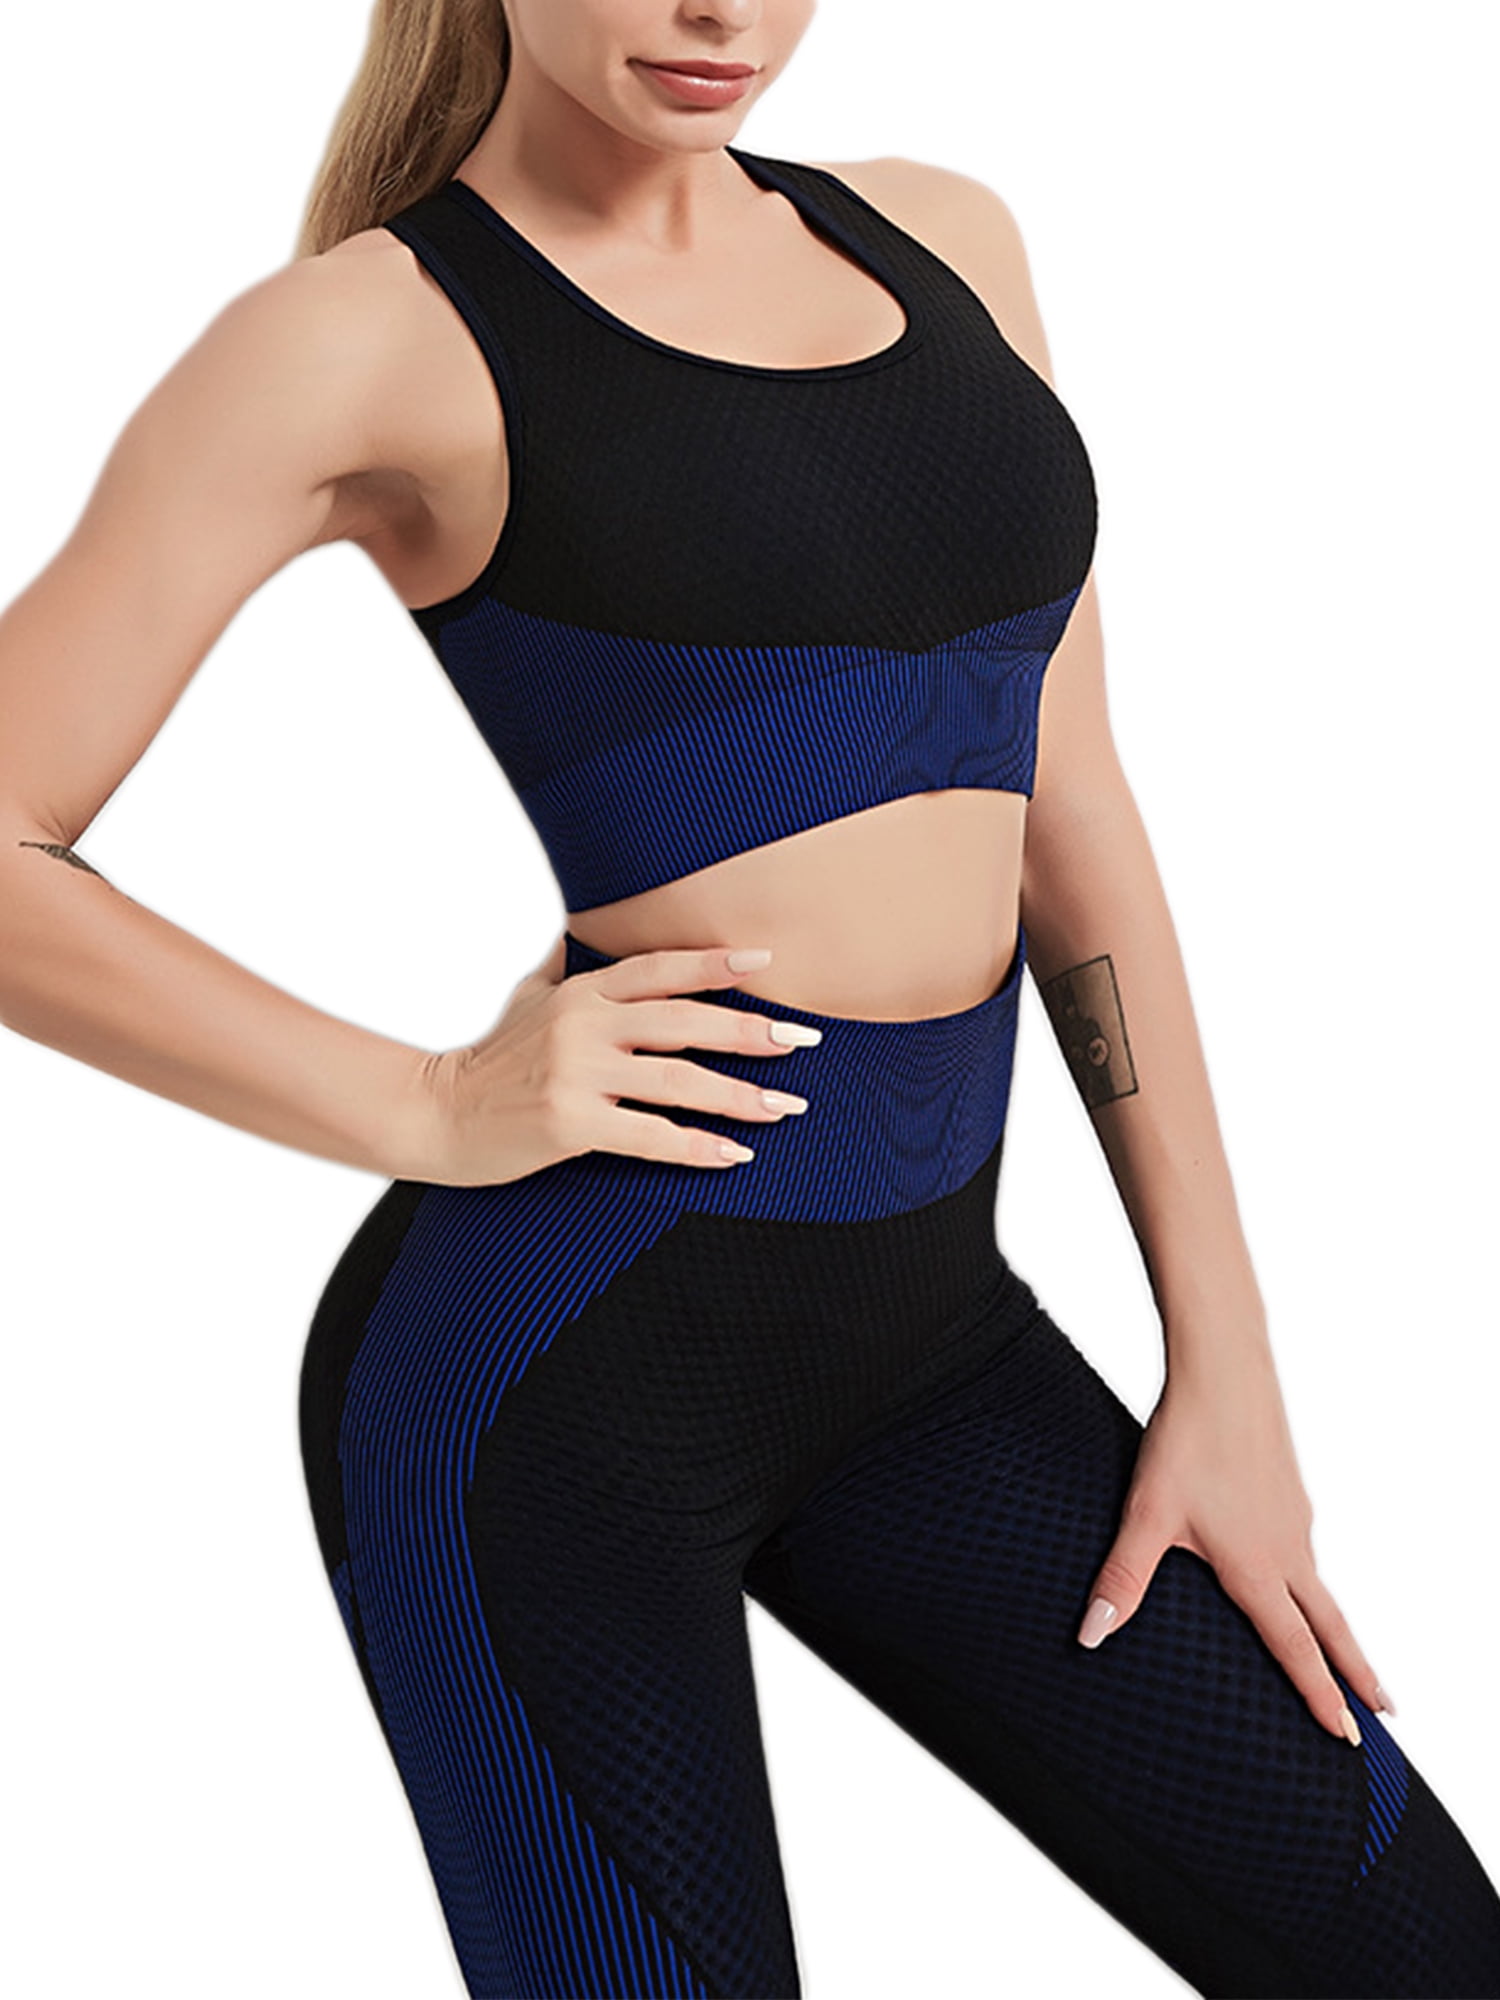 Women's Yoga Suit Top Bra Pants Leggings Workout Fitness Outfit Gym Stretch Waer 